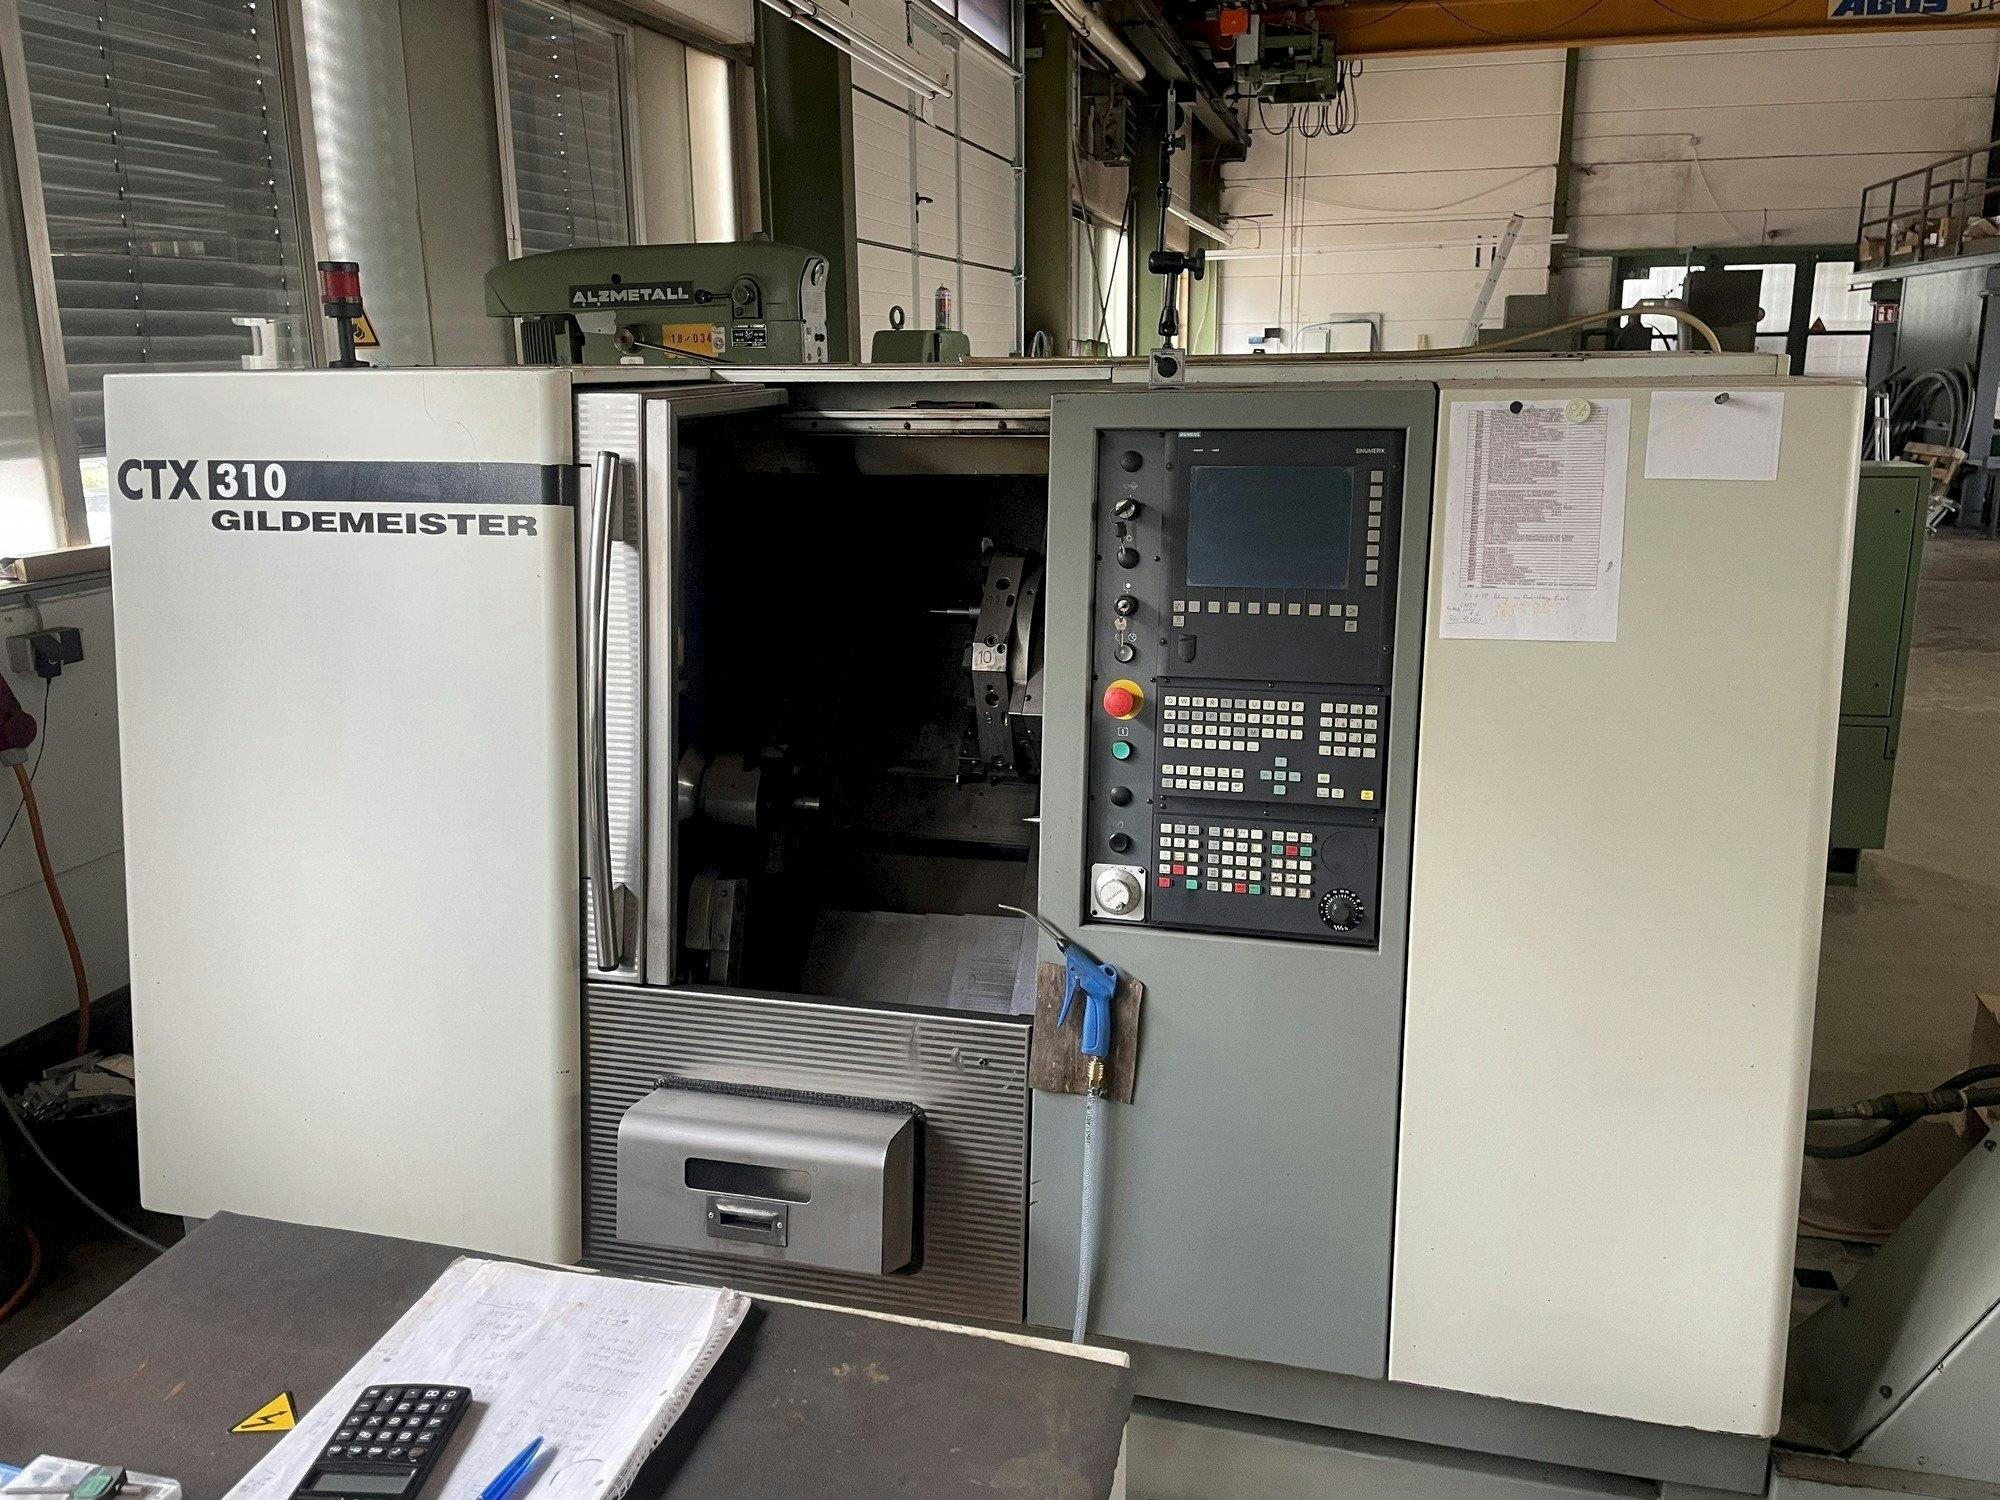 Front view of Gildemeister CTX 310  machine